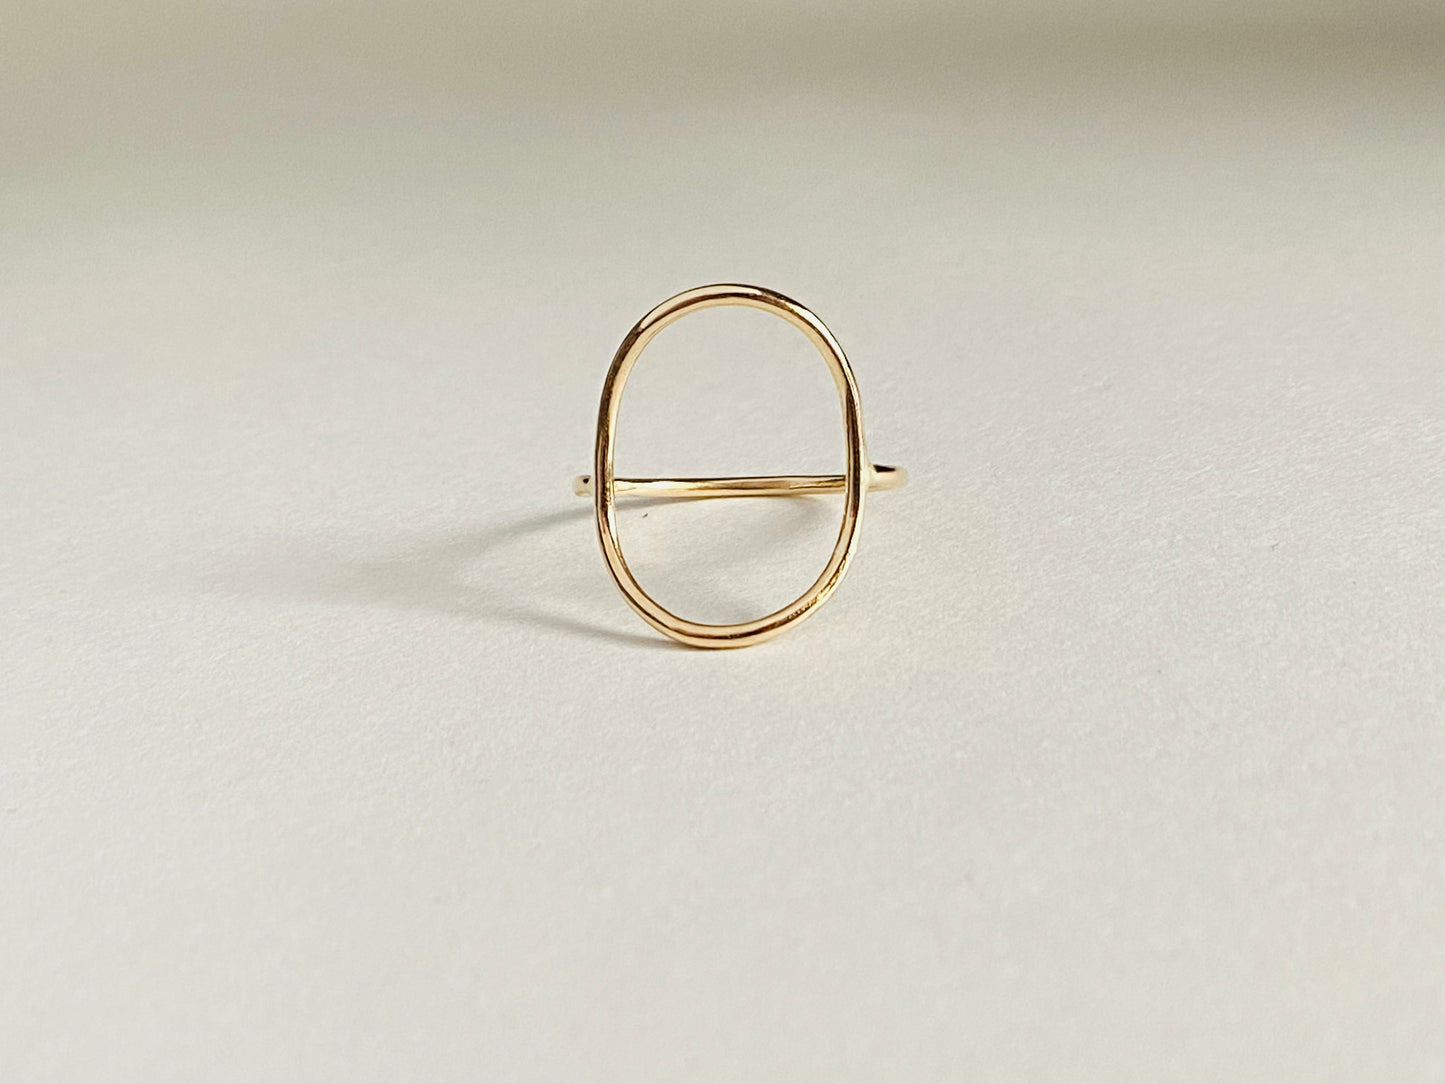 Gold filled oval ring with band attaching to either side of oval